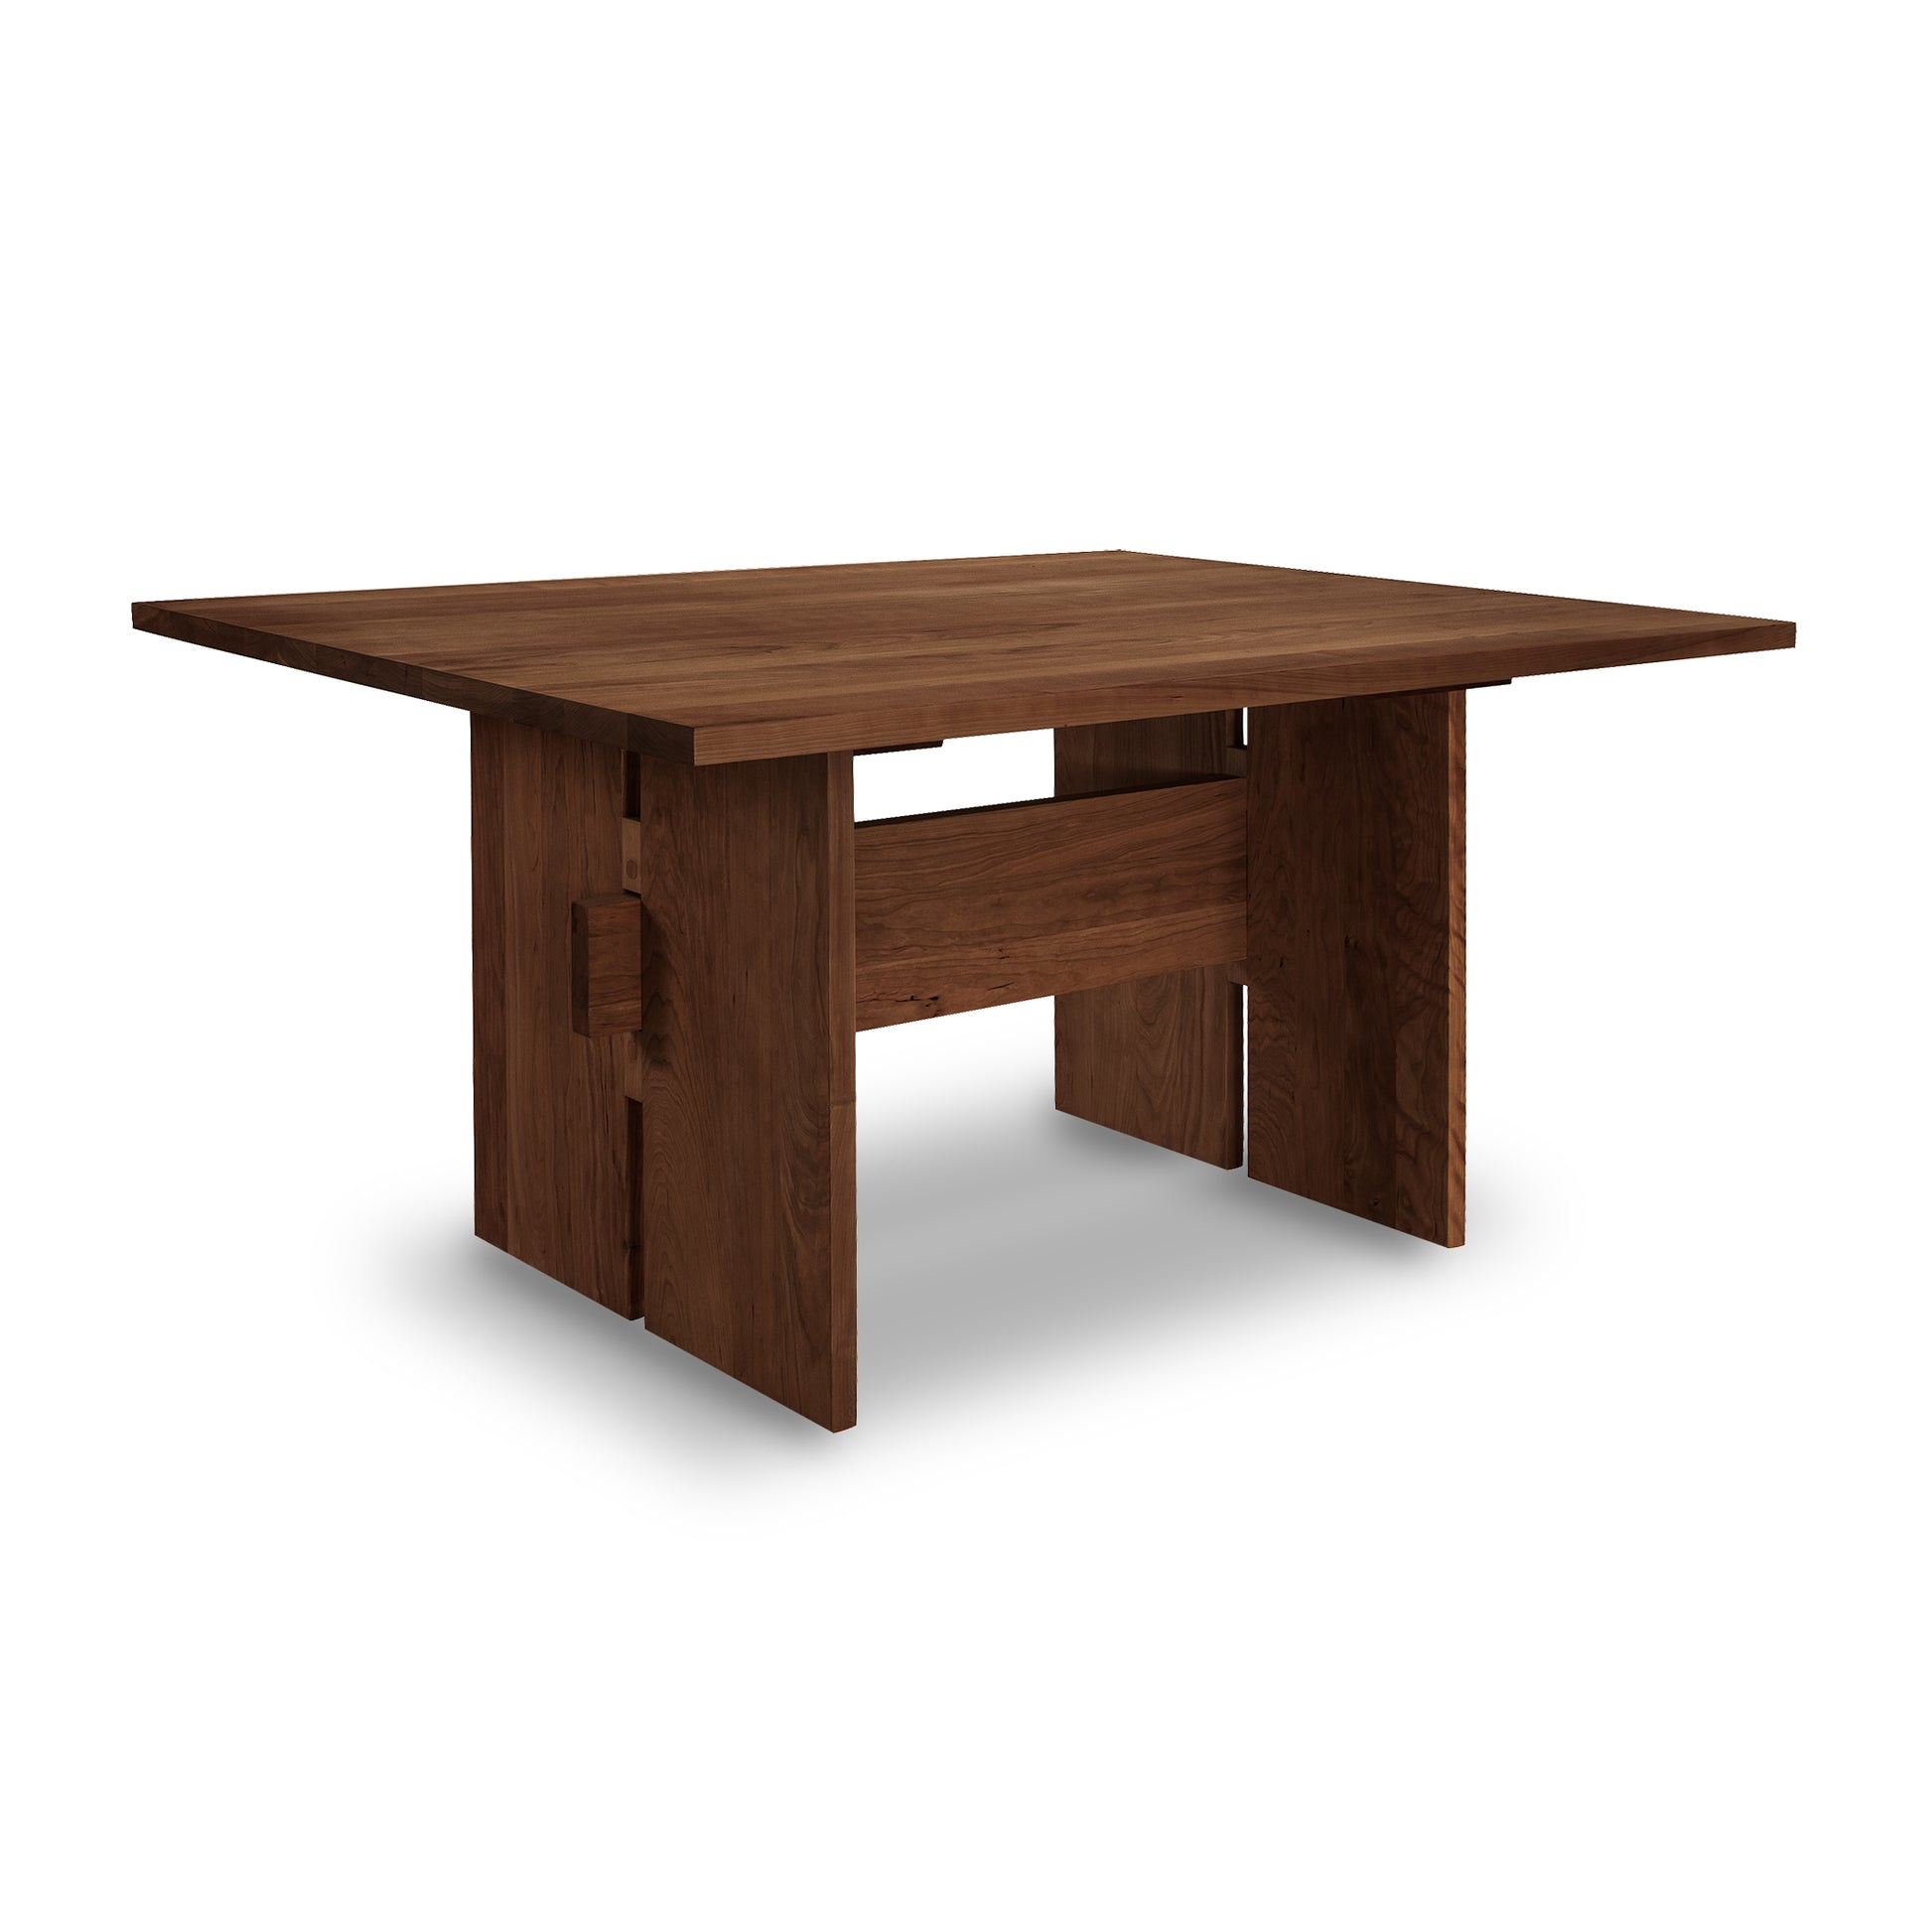 A Modern American Dining Table by Vermont Furniture Designs, with a solid wood construction and simple, sturdy design, isolated on a white background.